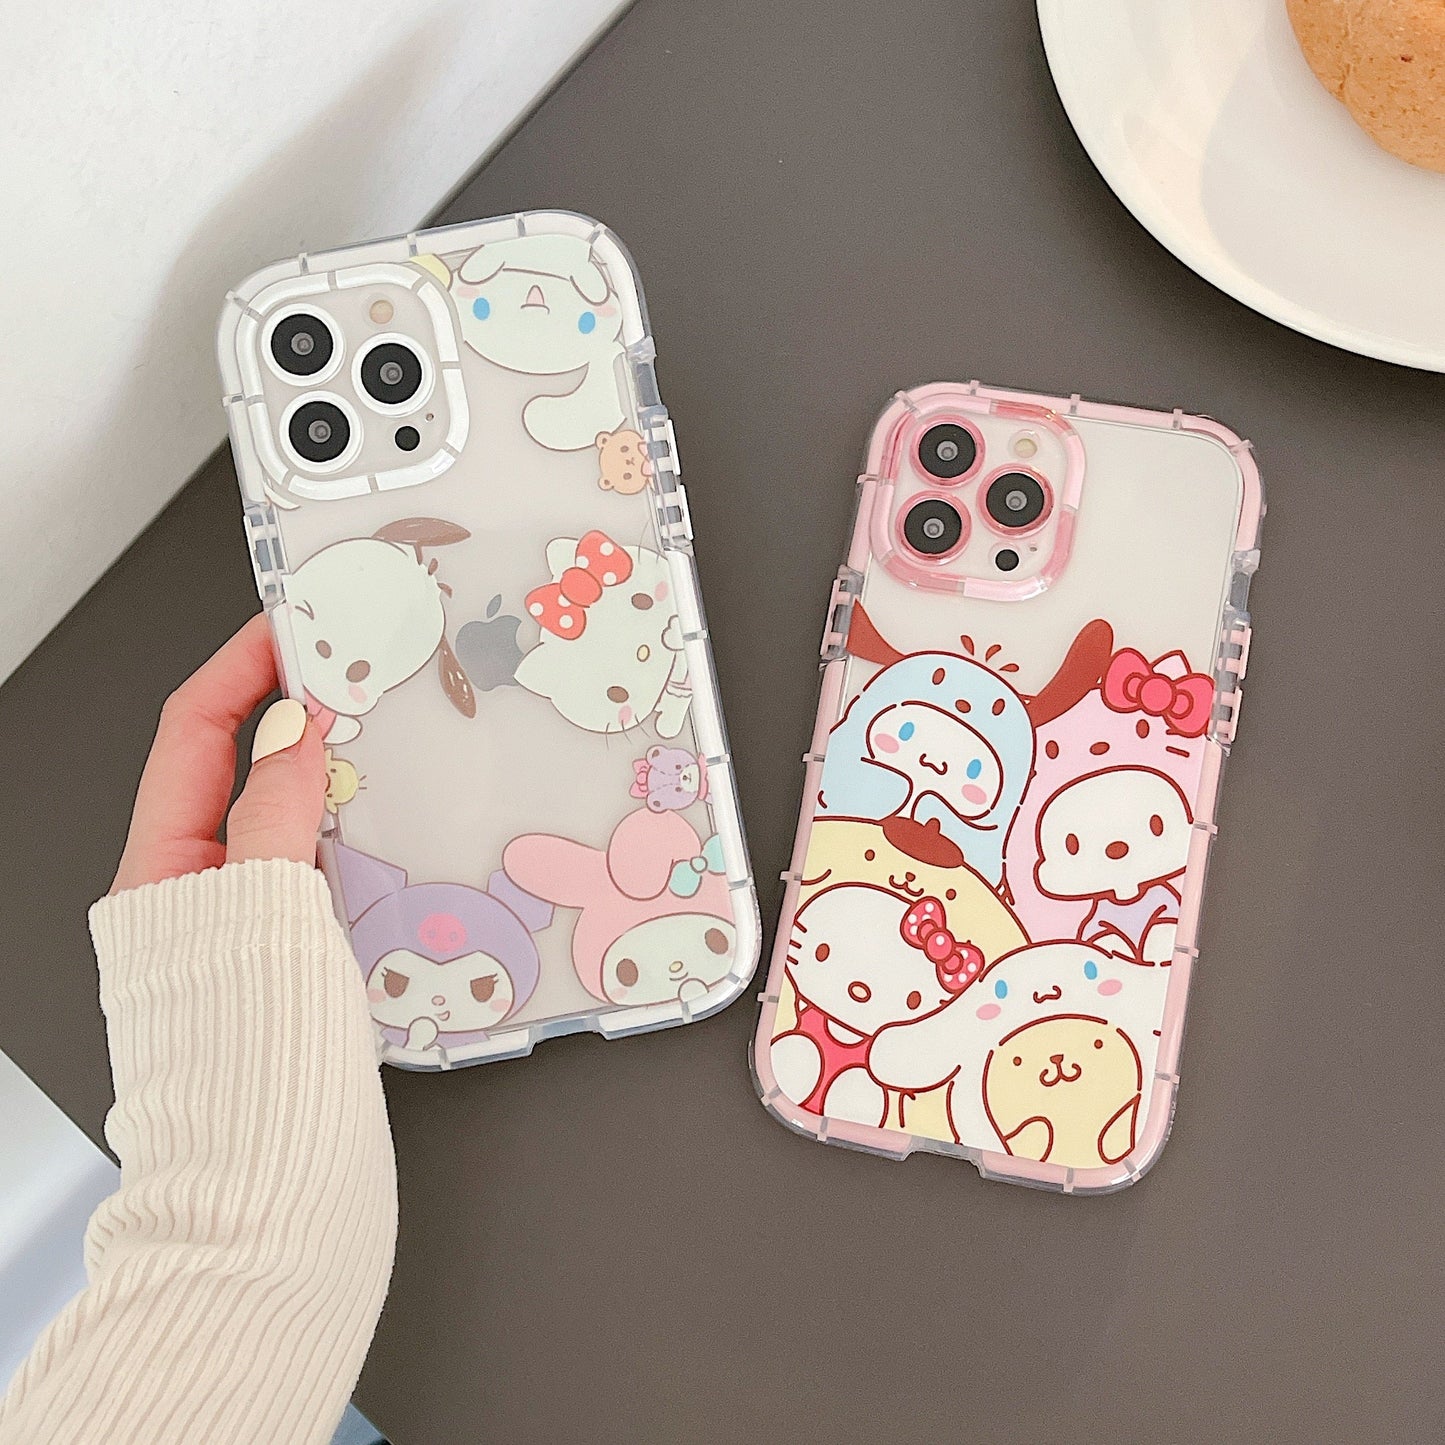 Sanrio Cinnamonroll Hello Kitty Soft Phone Cases For iPhone 13 12 11 Pro Max XR XS MAX 8 X 7 SE 2020 Lady Girl Anti-drop Cover